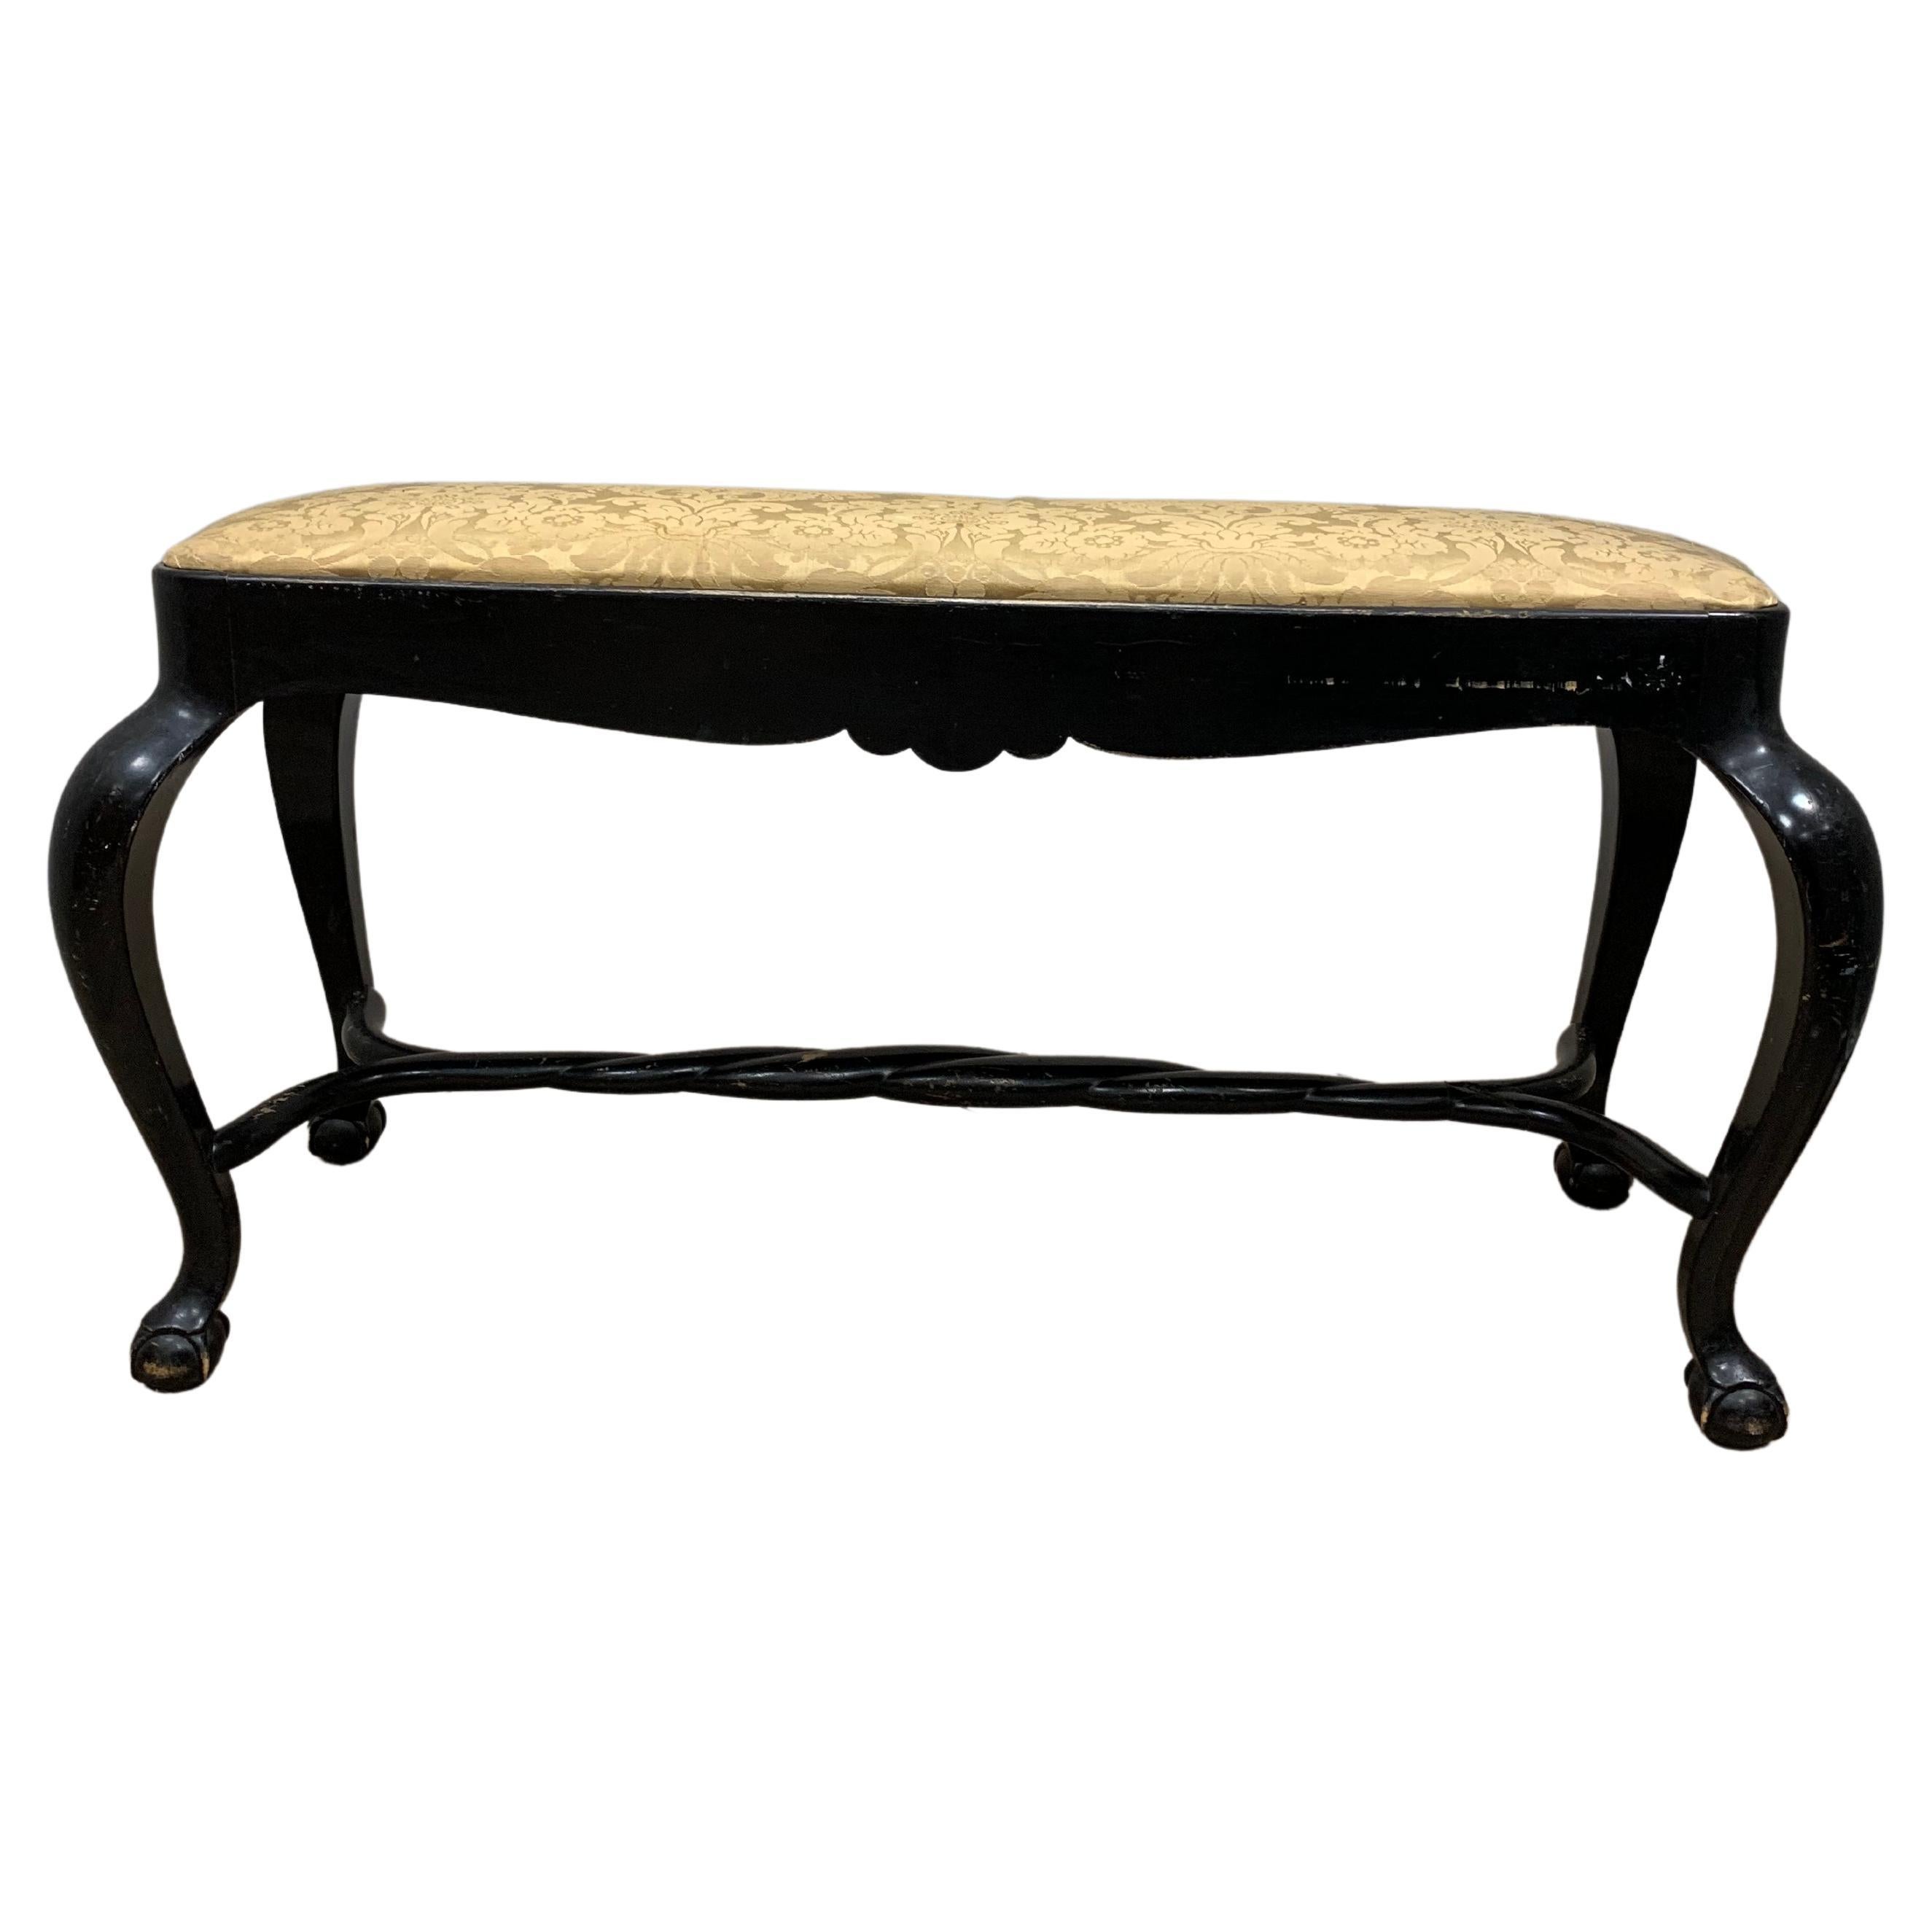 1920s Ebonised Baroque Style Swedish Stool or Bench with Ball & Claw Feet For Sale